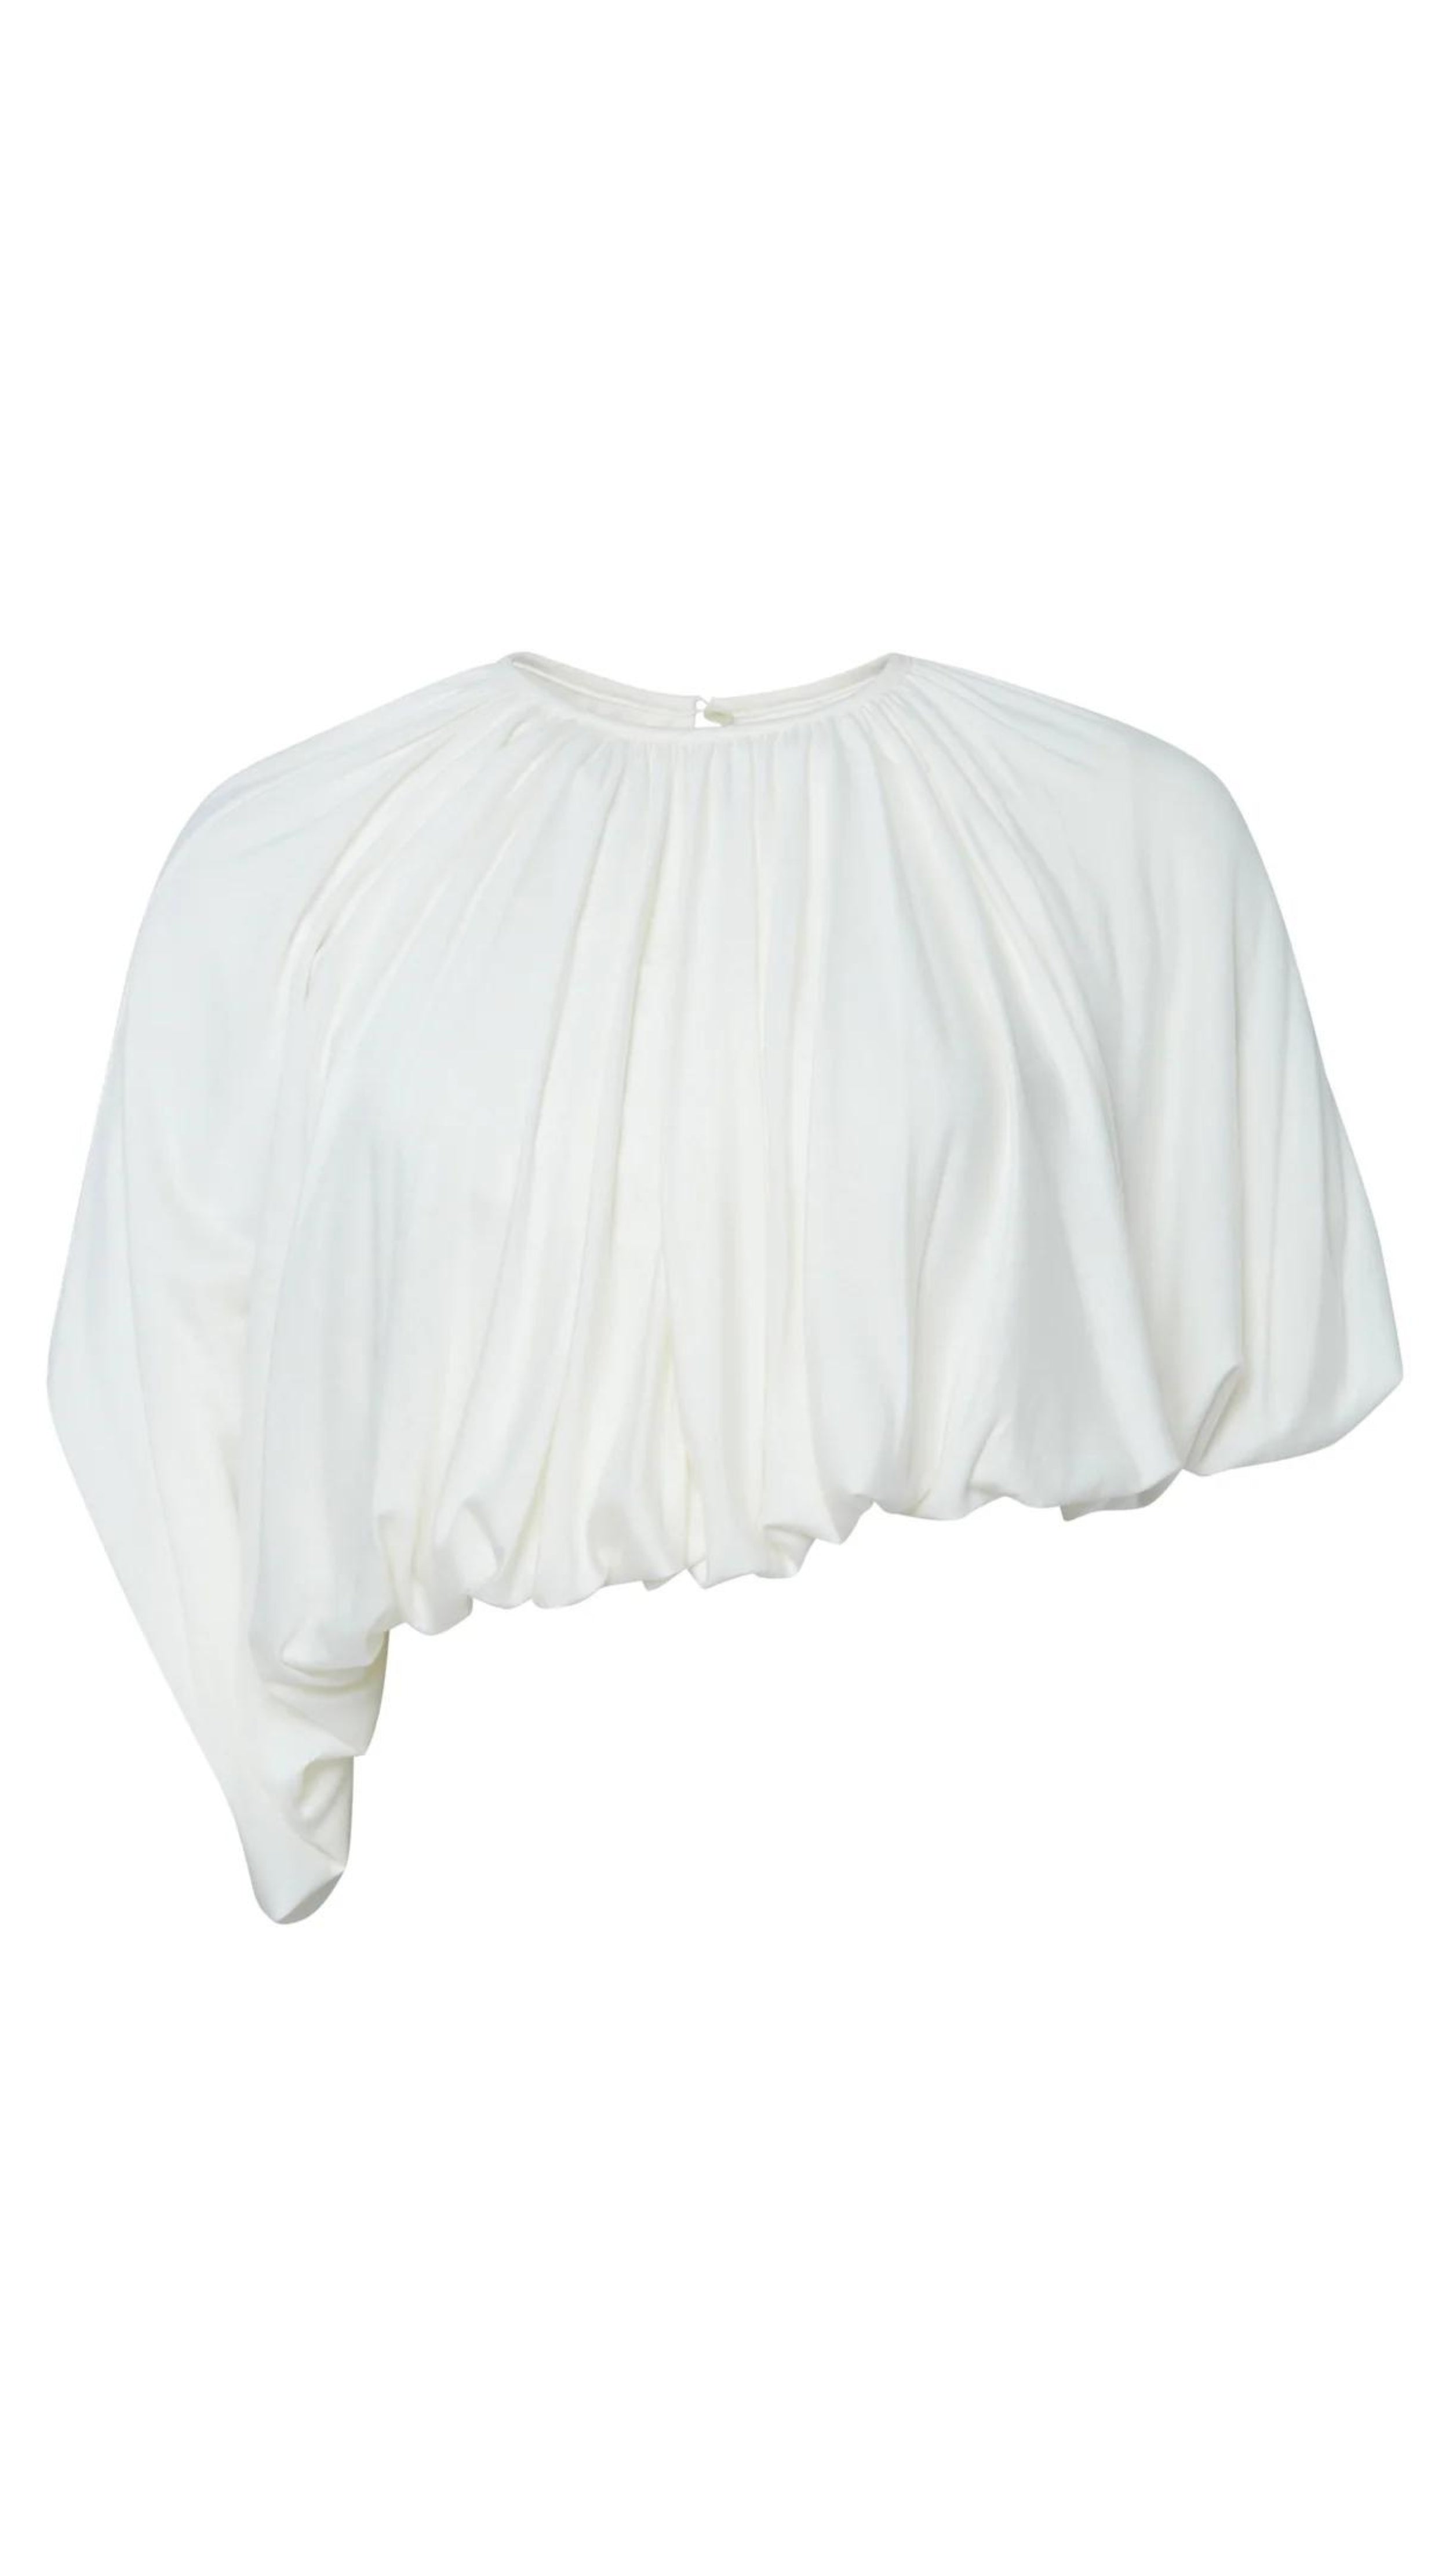 Altuzarra Naxos Top in Ivory. Draped jersey create a fluid look with an asymmetrical hemline. Product photo shown facing front.